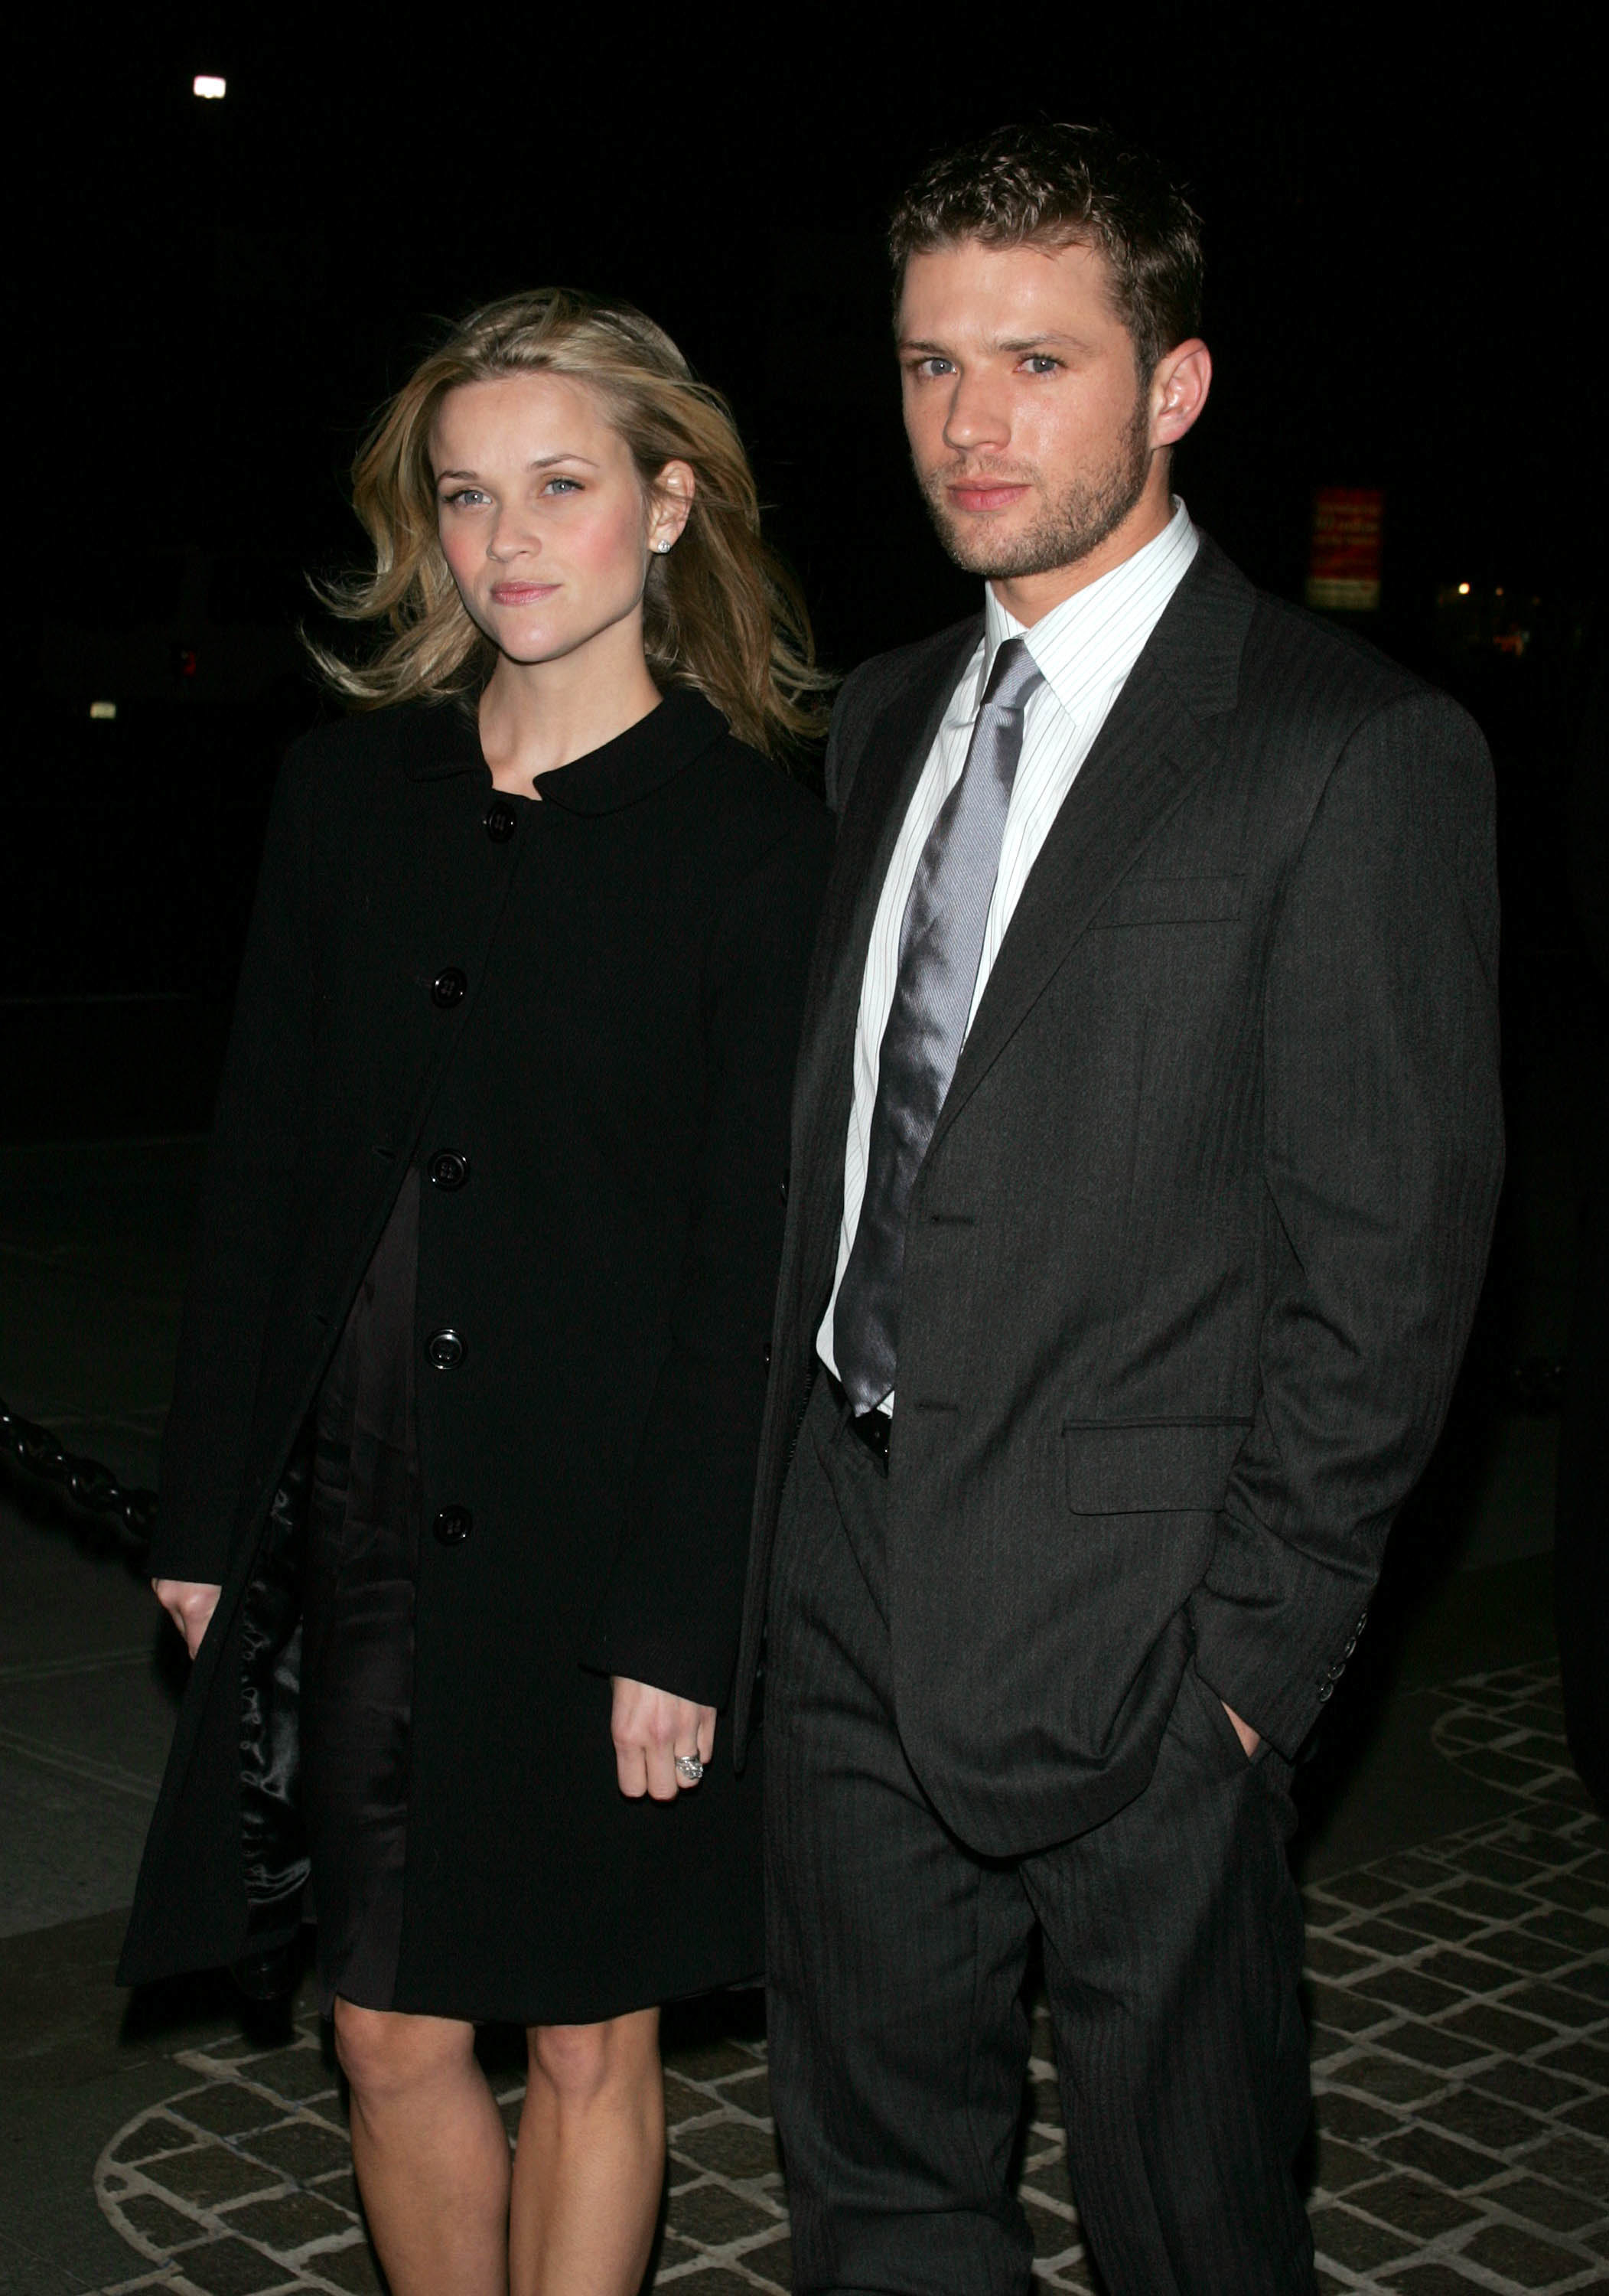 Reese Witherspoon and Ryan Phillippe during The Cinema Society &amp;amp; Zenith Watches Host Screening of Flags of our Fathers